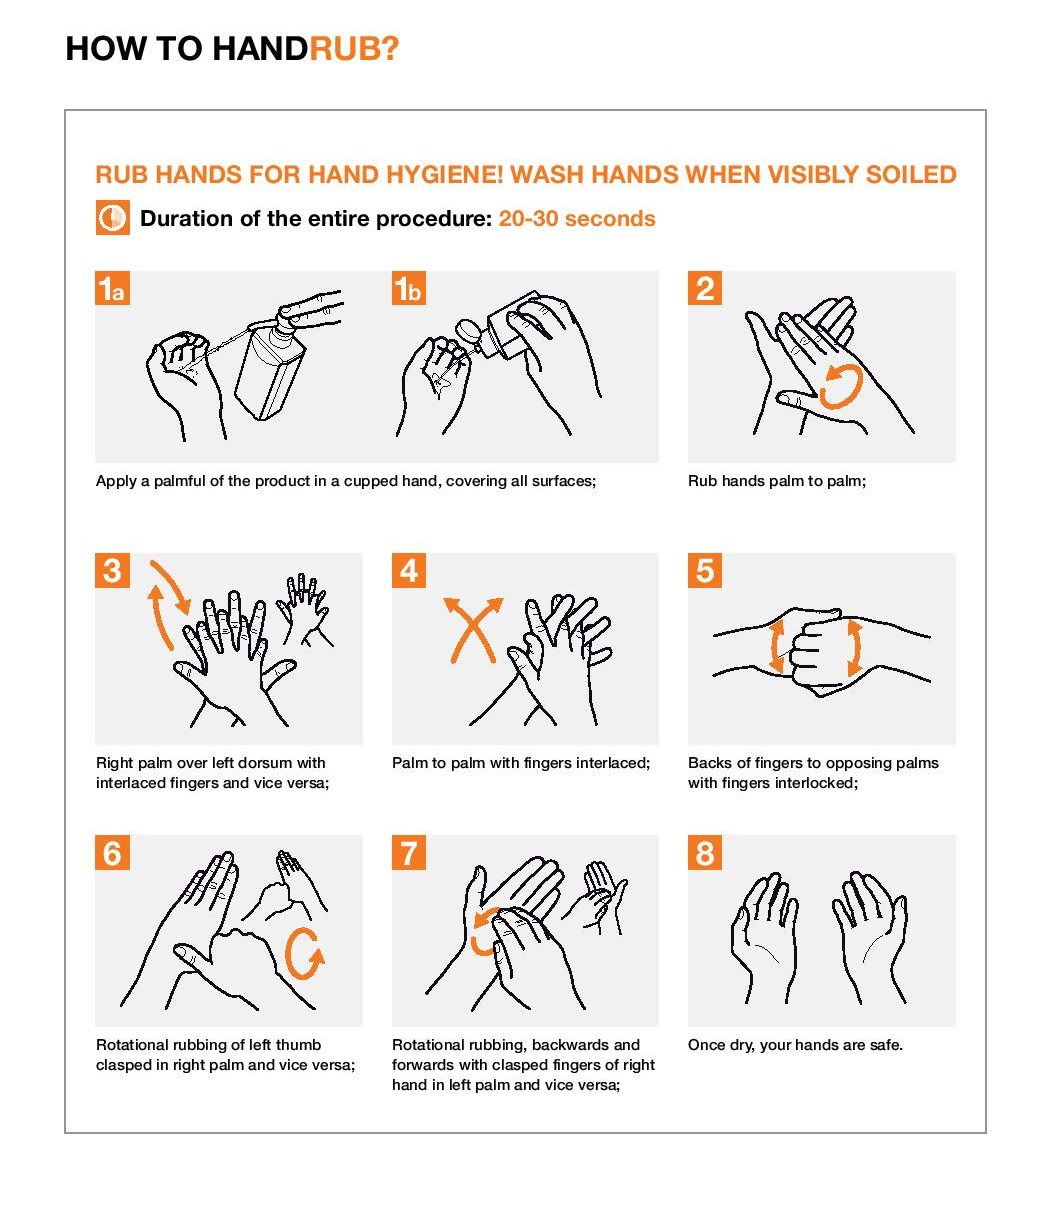 Source: https://www.who.int/gpsc/5may/Hand_Hygiene_Why_How_and_When ...